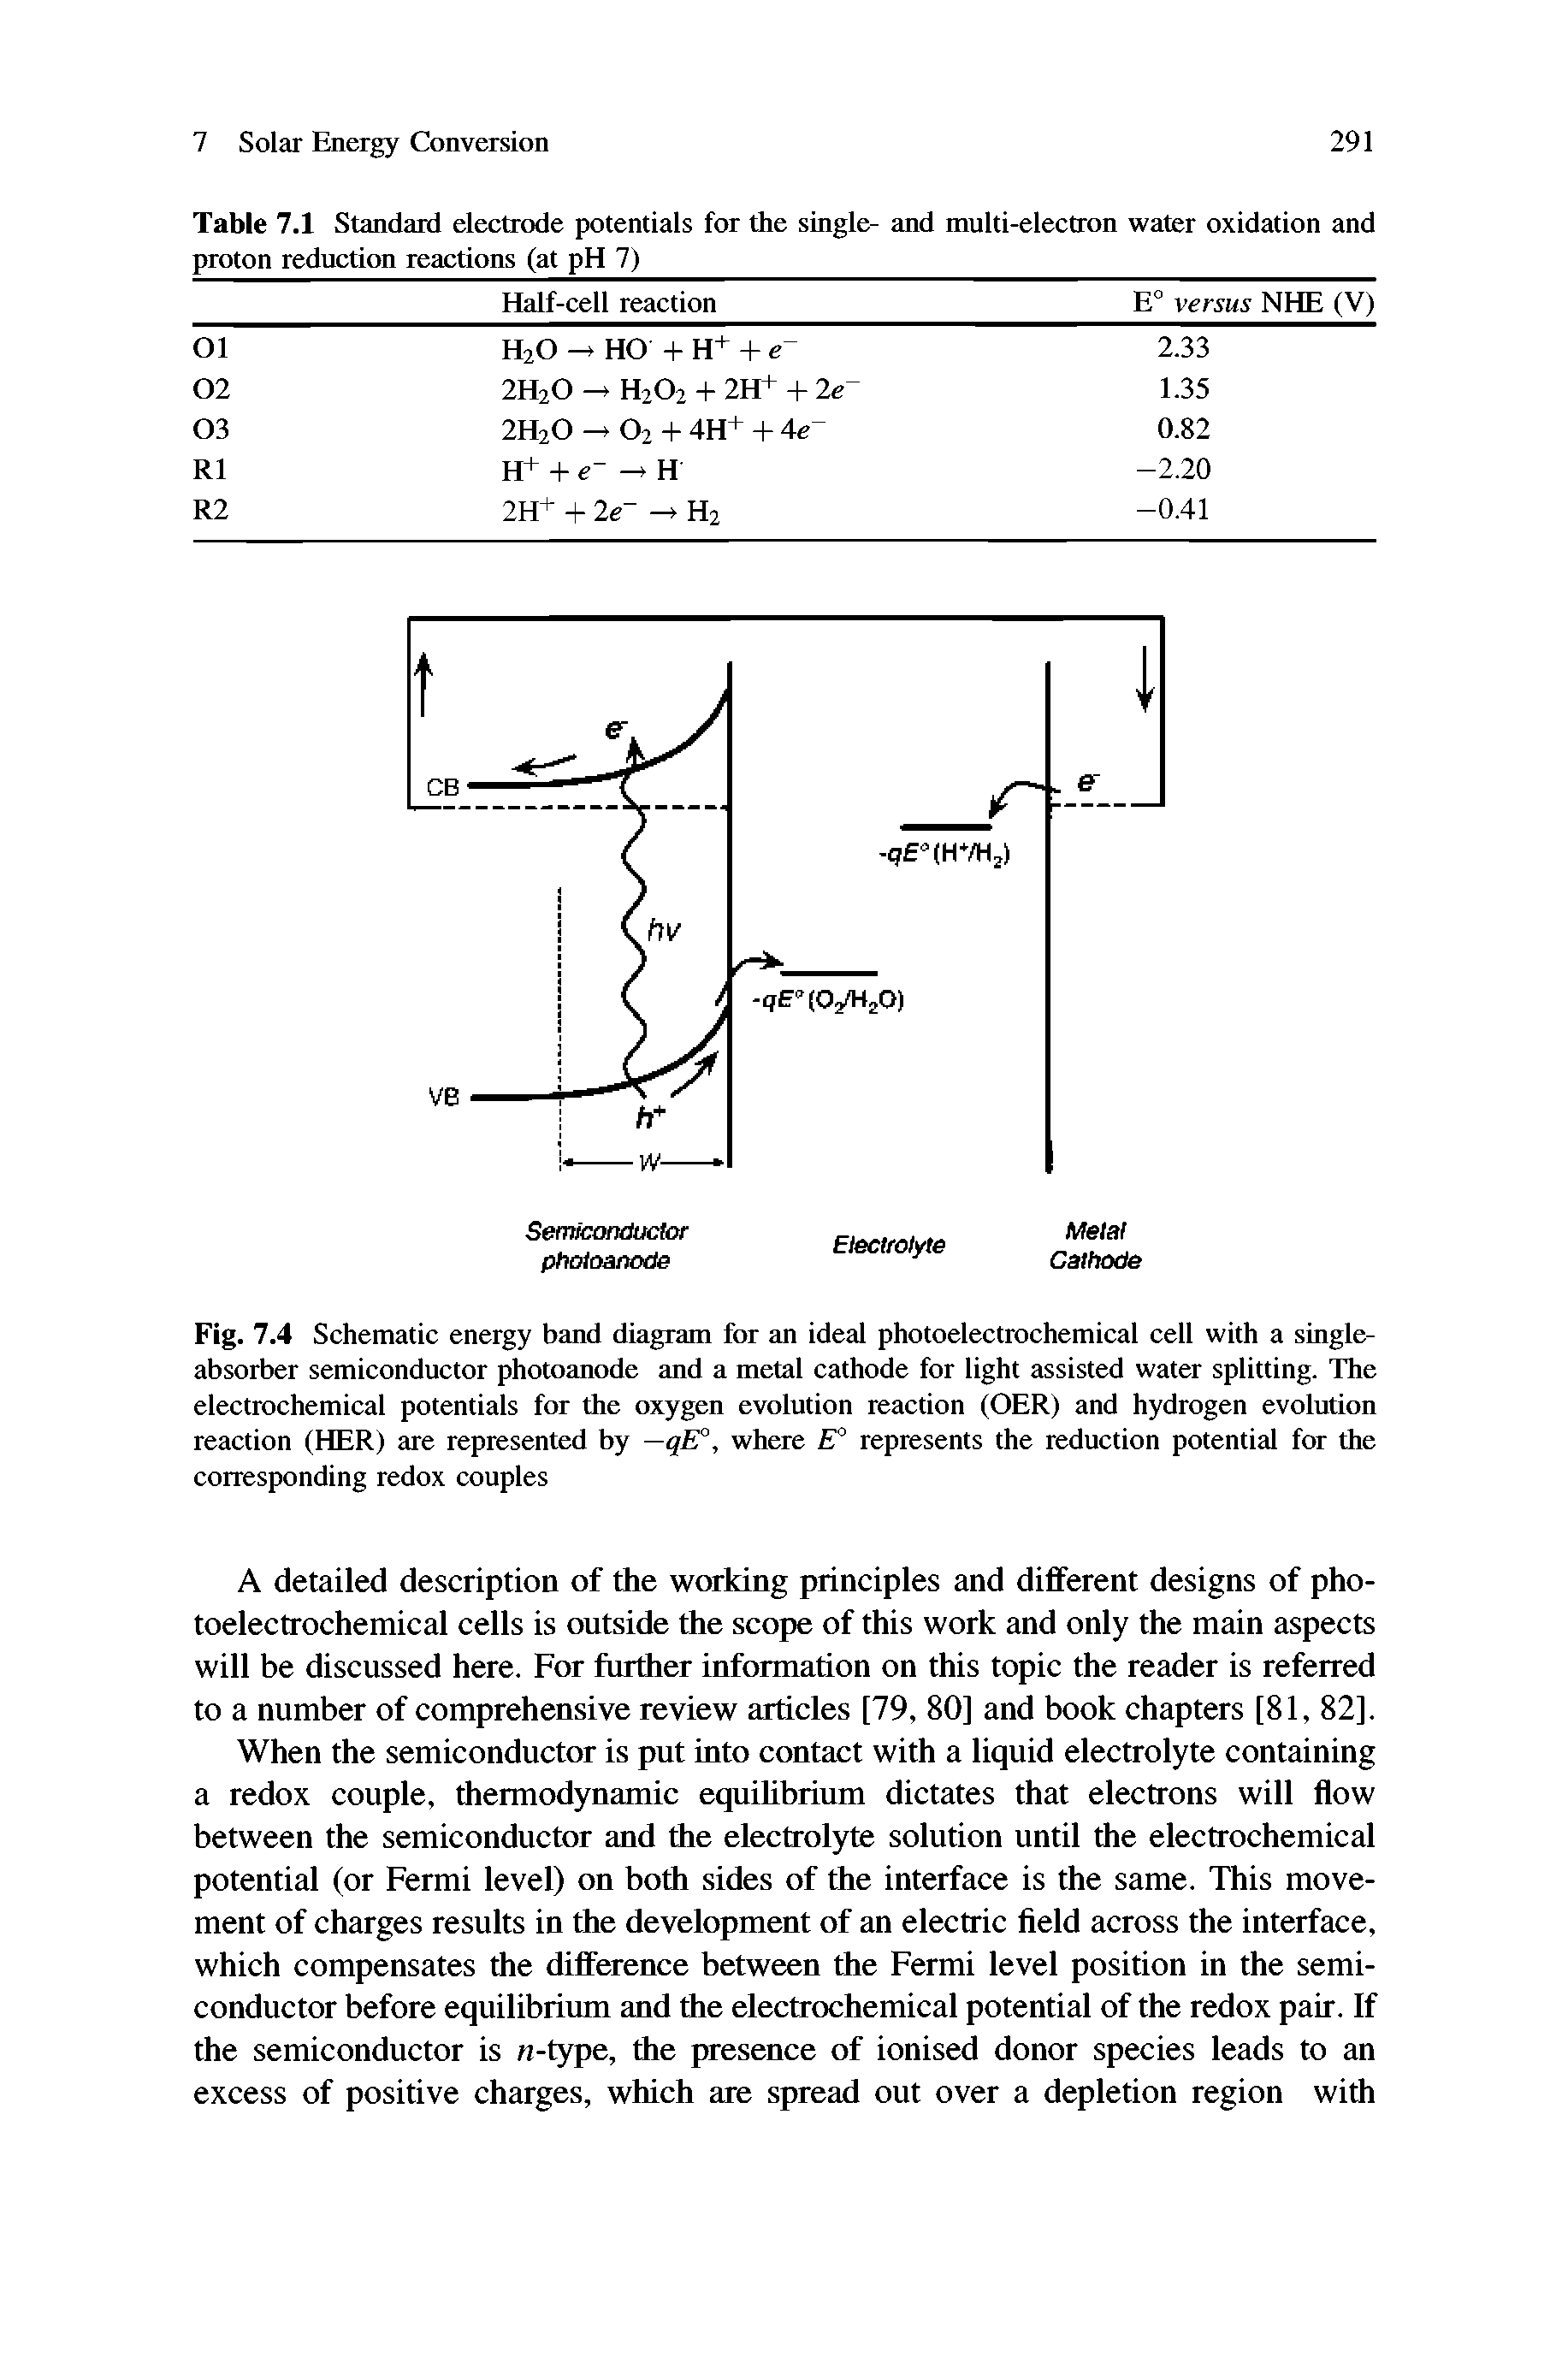 Fig. 7.4 Schematic eneigy band diagram for an ideal photoelectrochemical cell with a singleabsorber semiconductor photoanode and a metal cathode for light assisted water splitting. The electrochemical potentials for the oxygen evolution reaction (OER) and hydrogen evolution reaction (HER) are represented by —qE°, where represents the reduction potential for the corresponding redox couples...